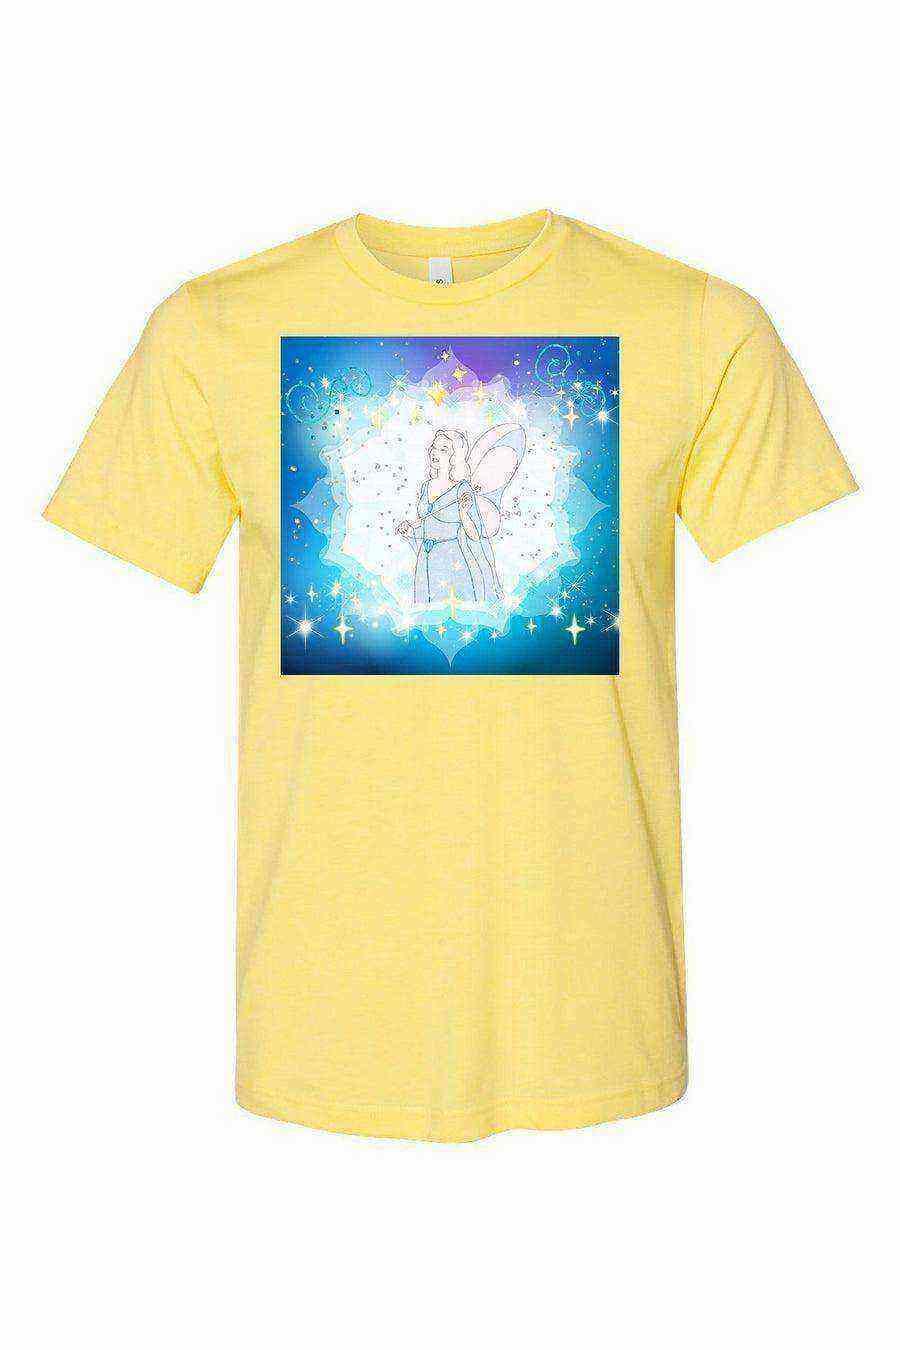 Youth | Blue Fairy Shirt | When You Wish Upon A Star - Dylan's Tees